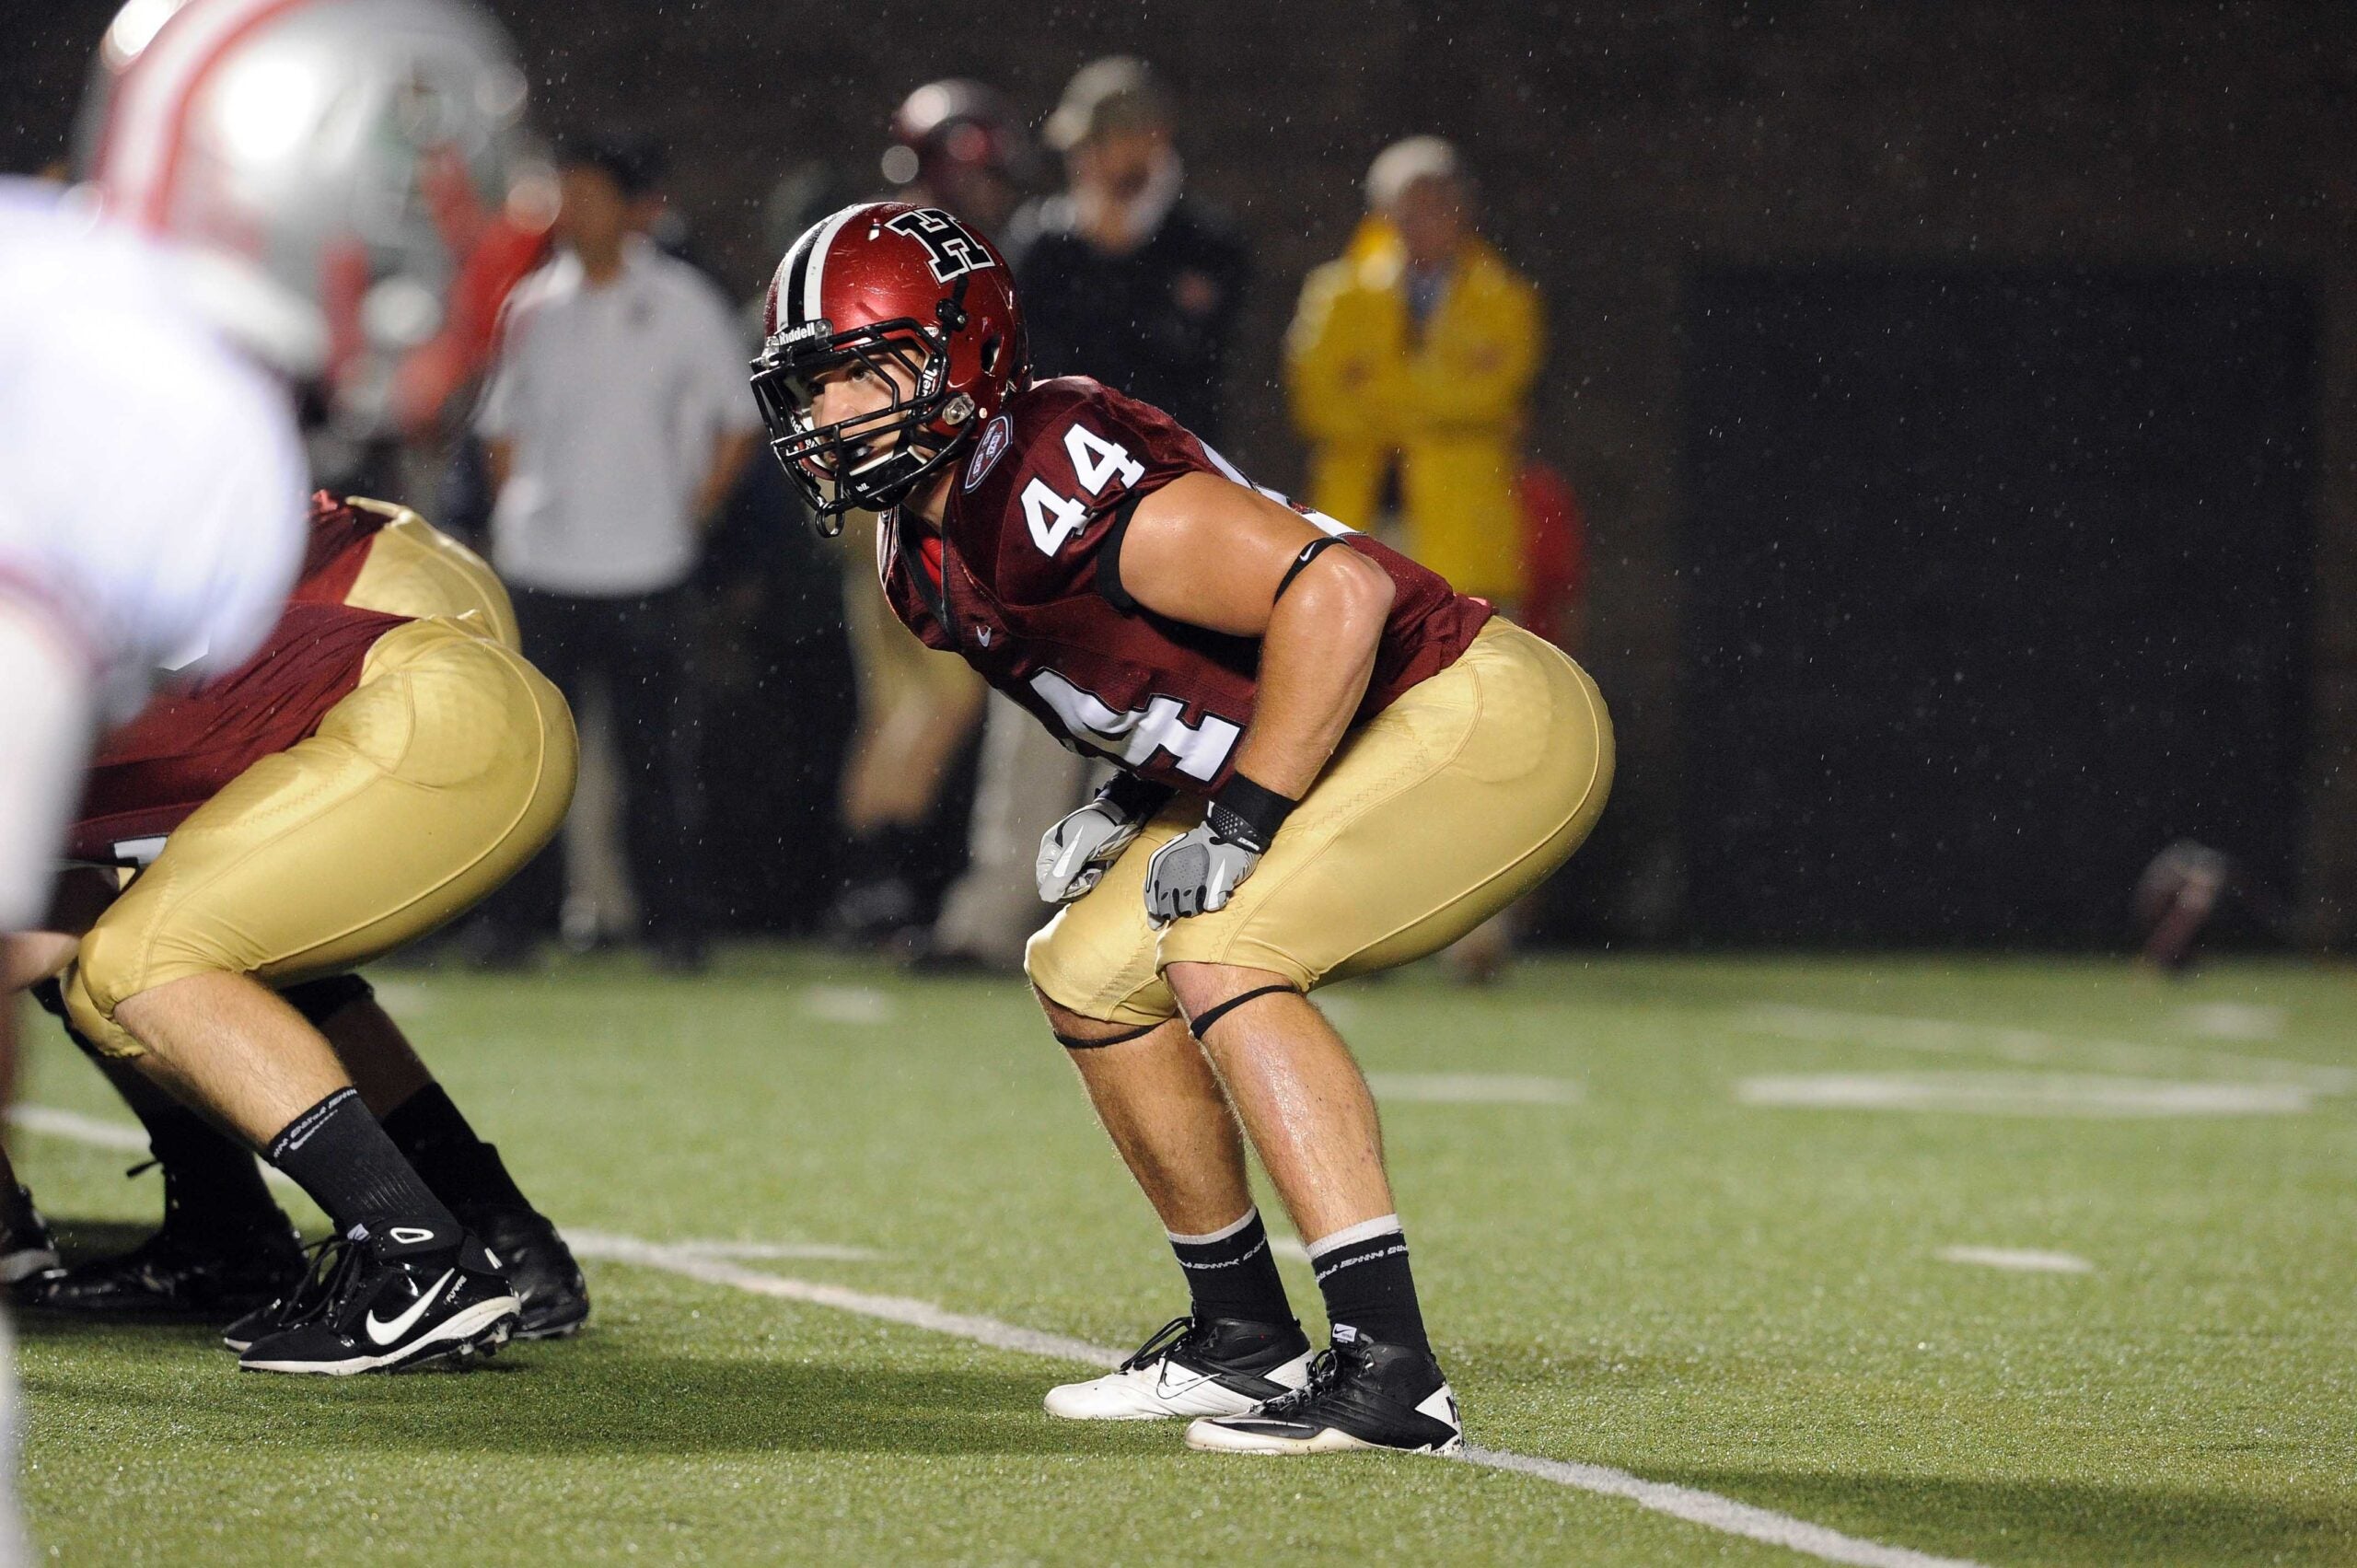 Kyle Juszczyk playing for Harvard vs. Brown in September 2011.